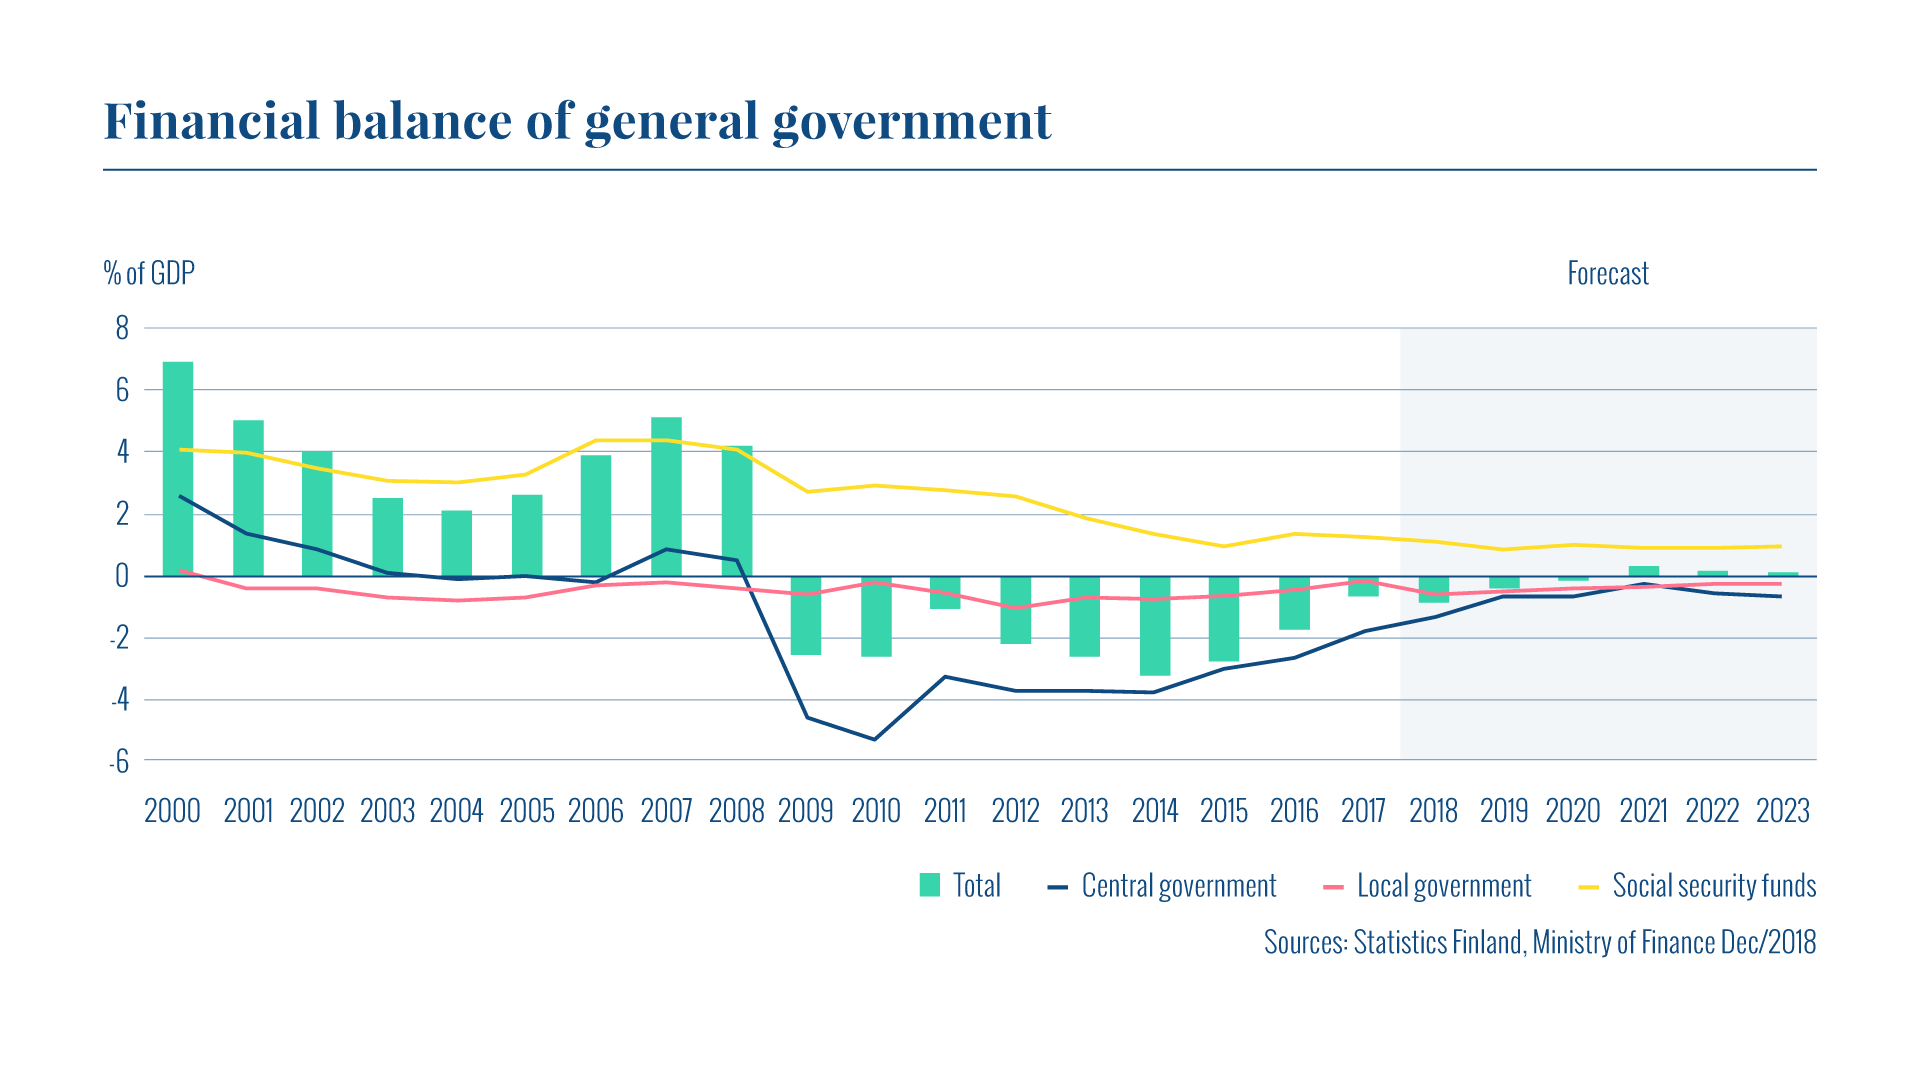 The graph shows the financial balance of the Finnish general government. Social security funds are running a surplus while central and local government show small deficits.